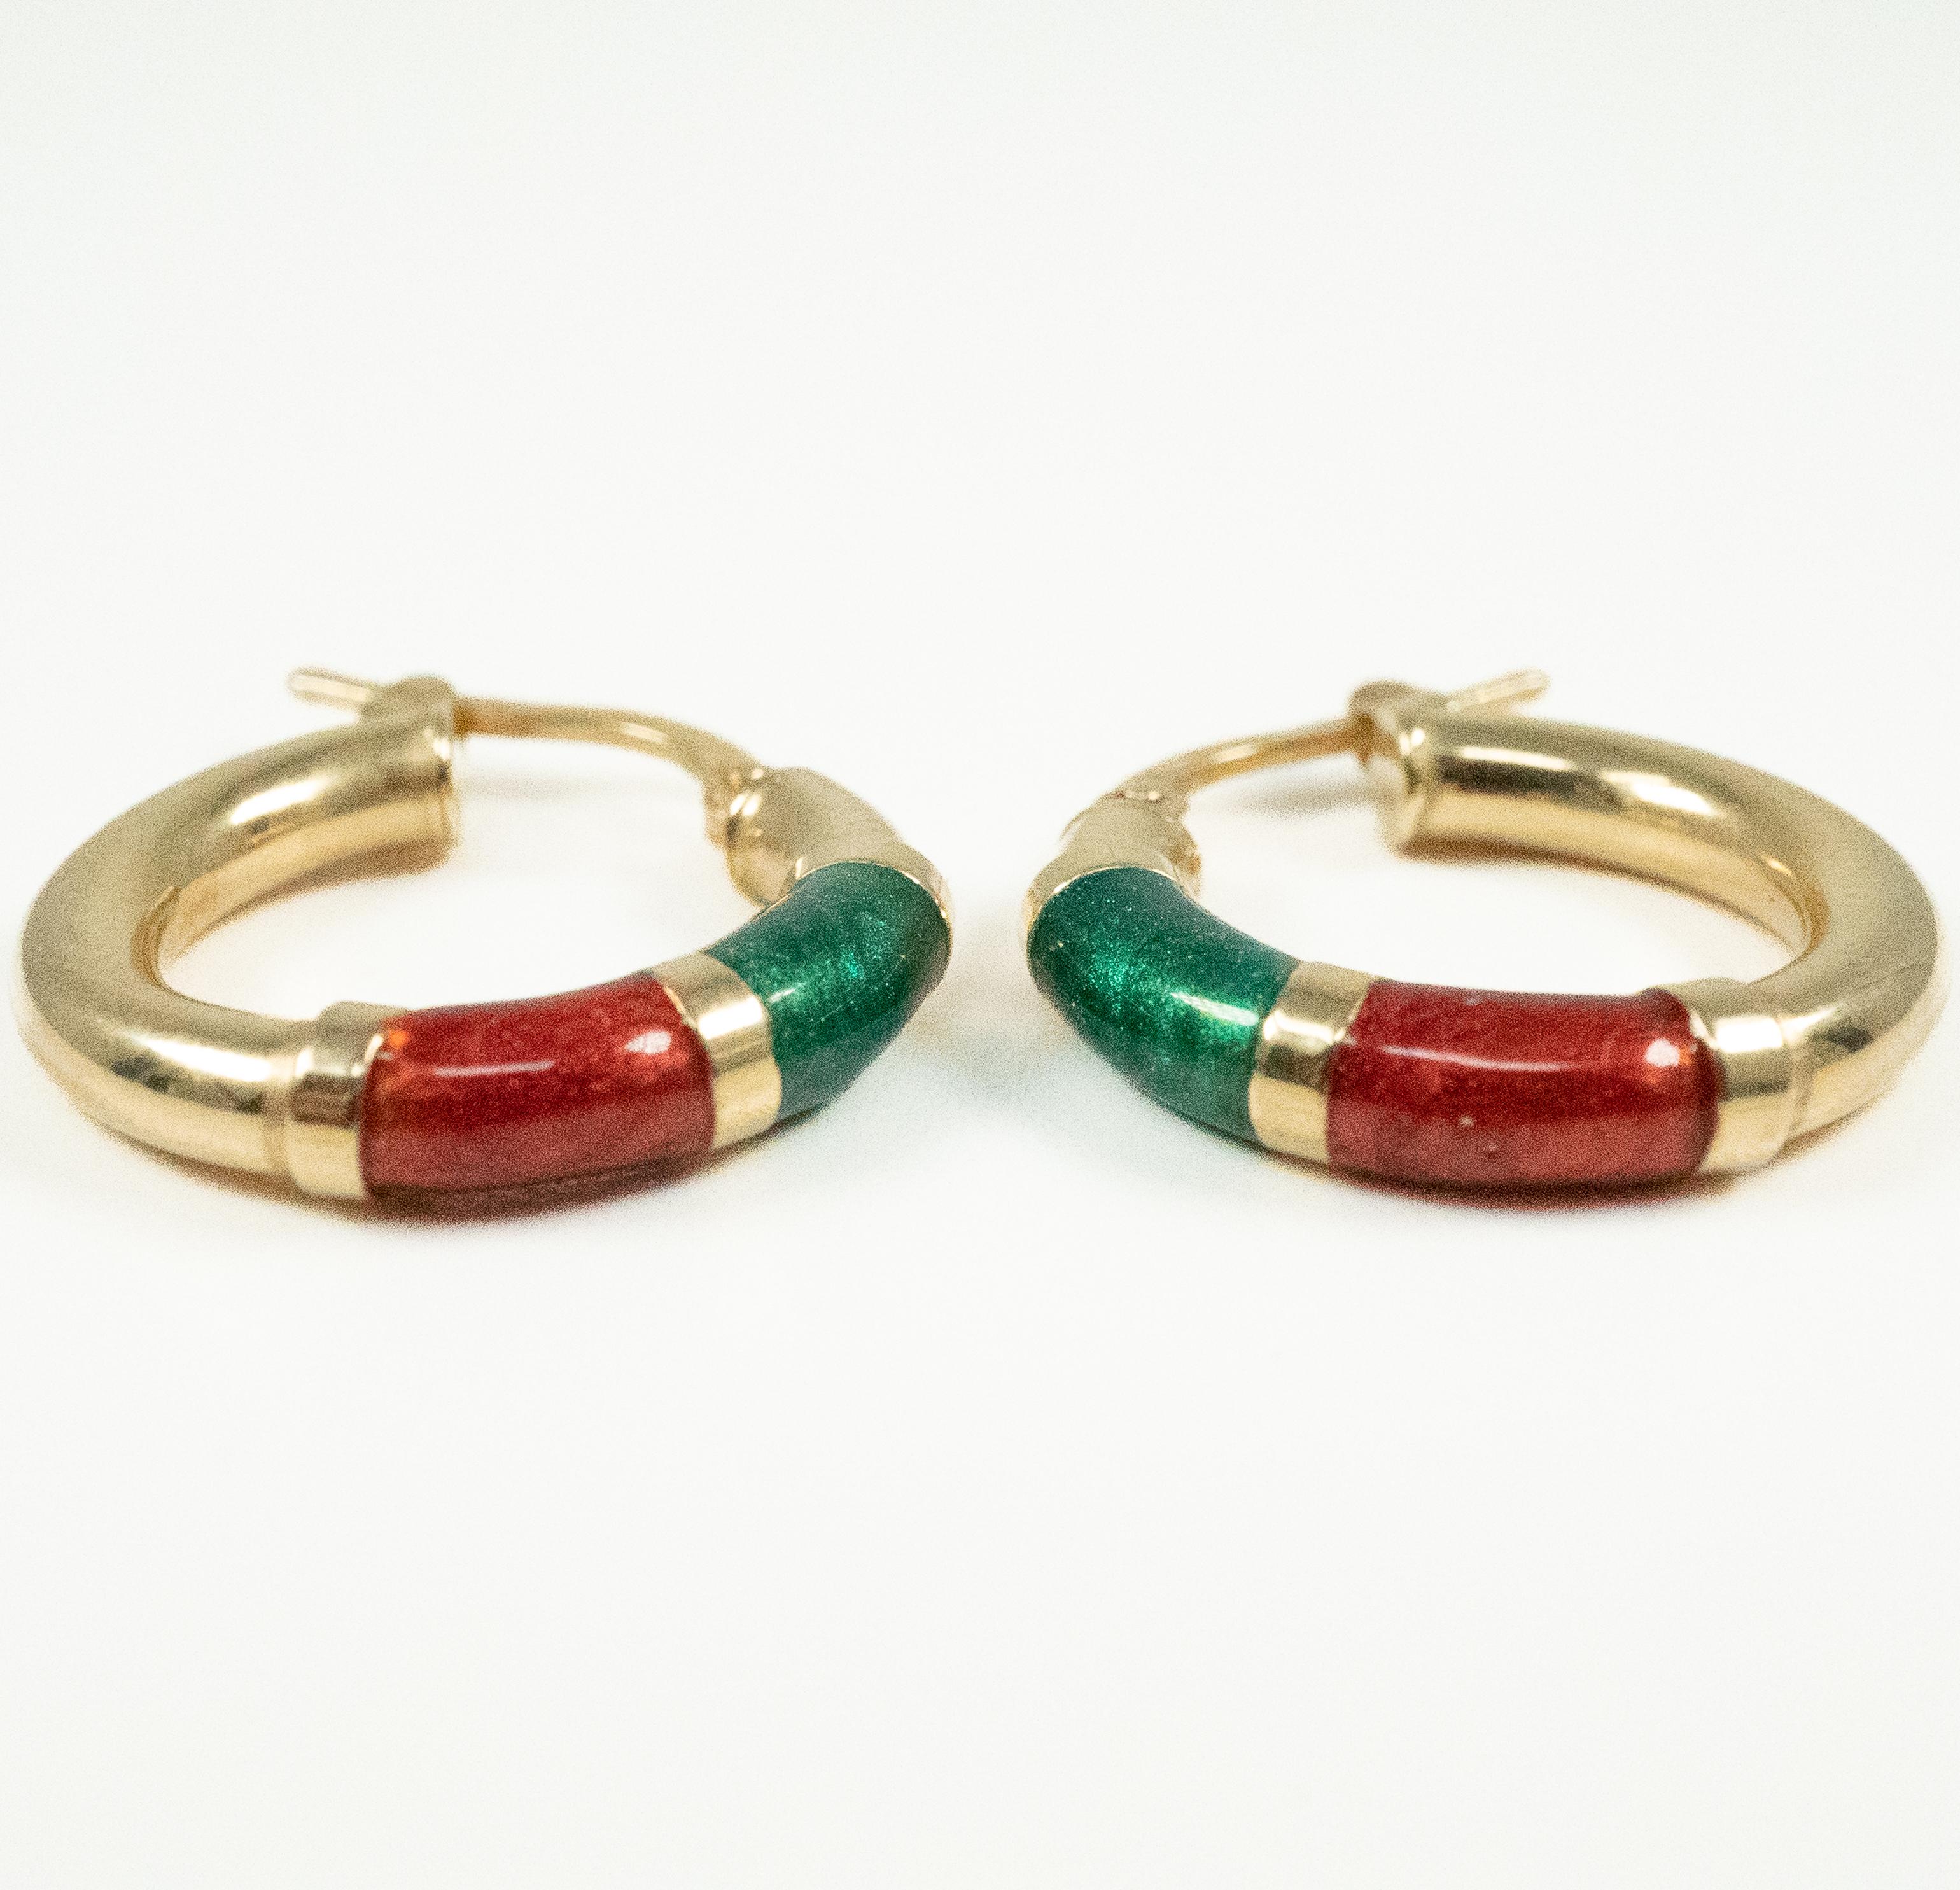 So light and comfy on the ear!  In 14 karat yellow gold with reddish and blue-green enamel accents.   